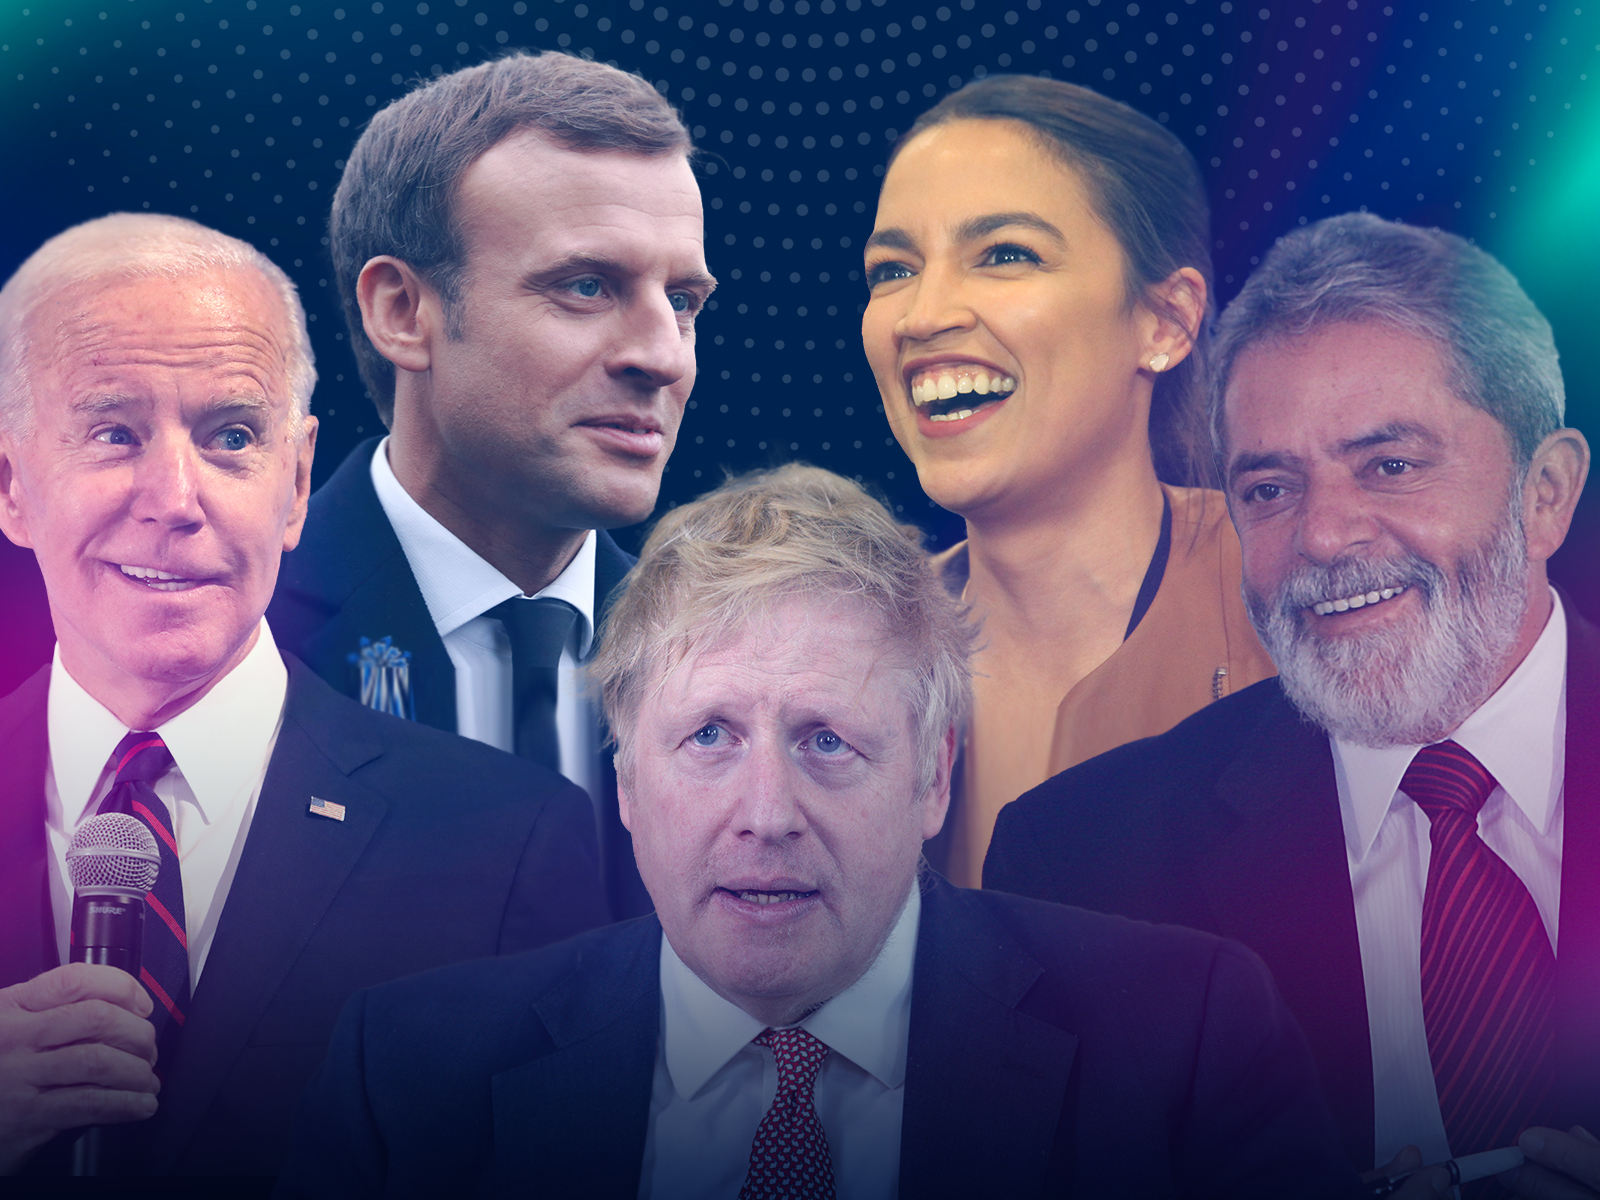 Top Political Betting Markets In 2022 (And What You Should Bet On)